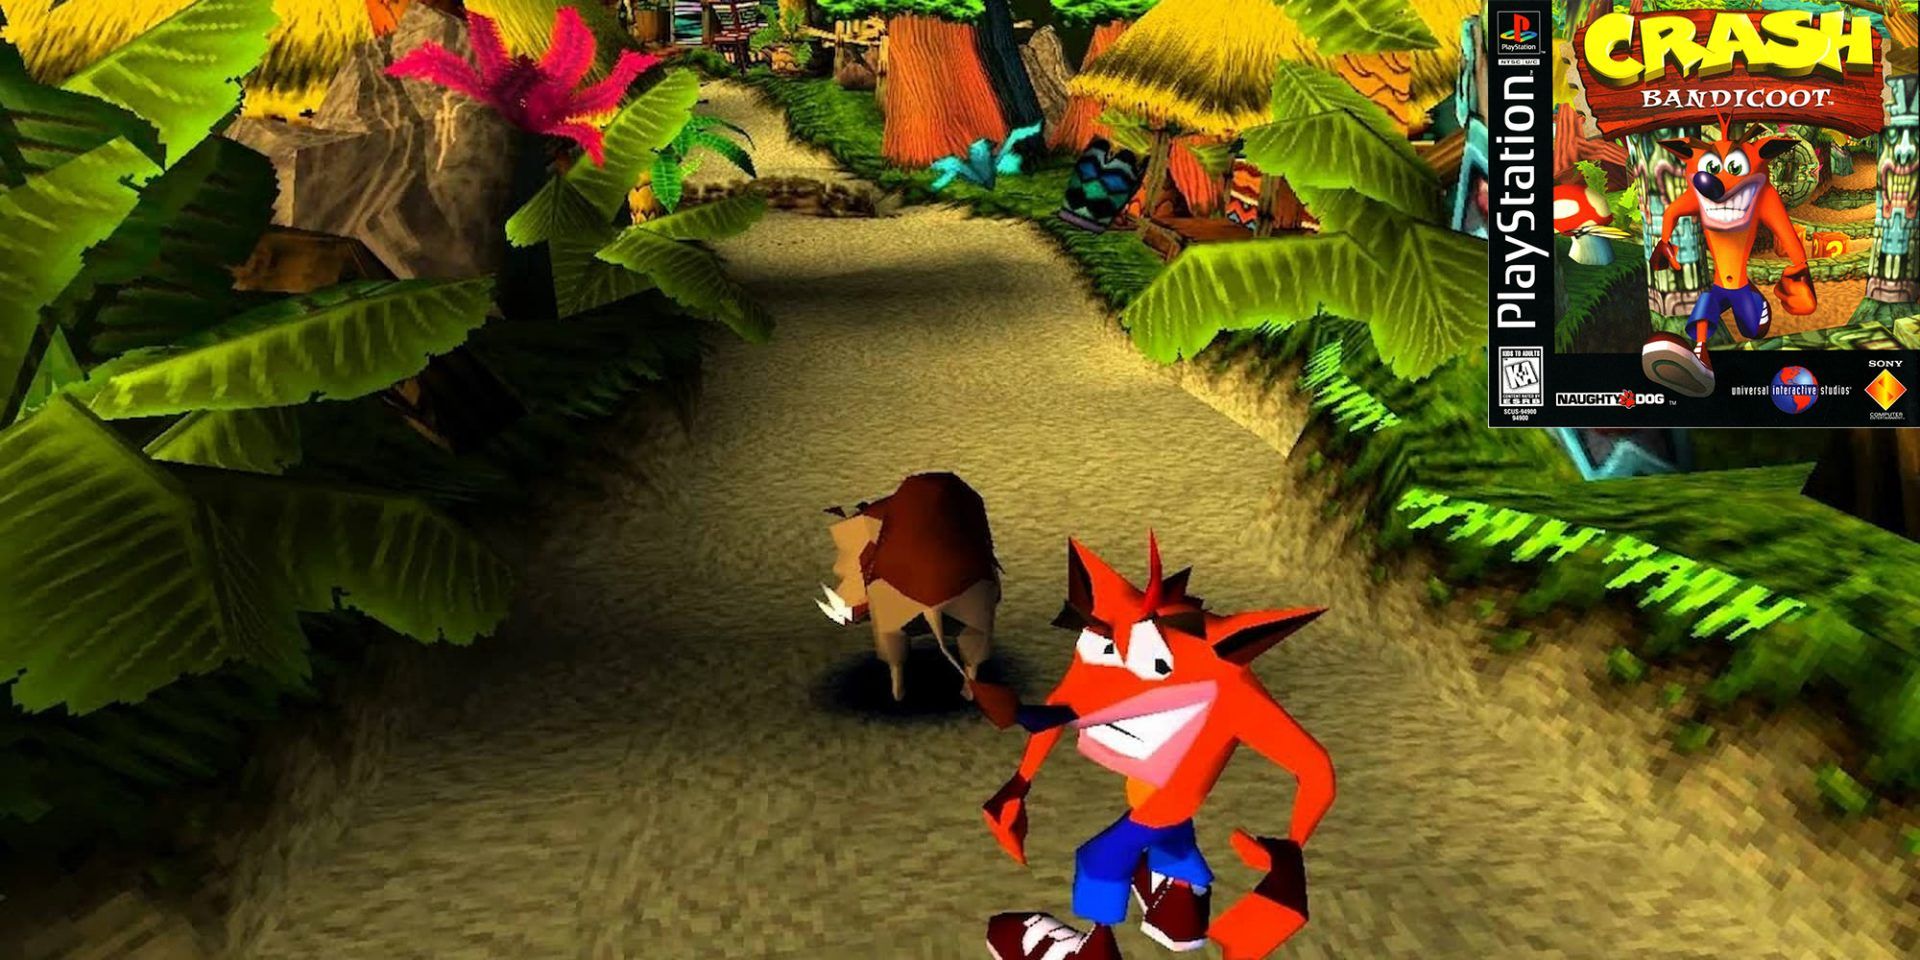 Screenshot from Crash Bandicoot PS1, with the game's cover in the top right corner.